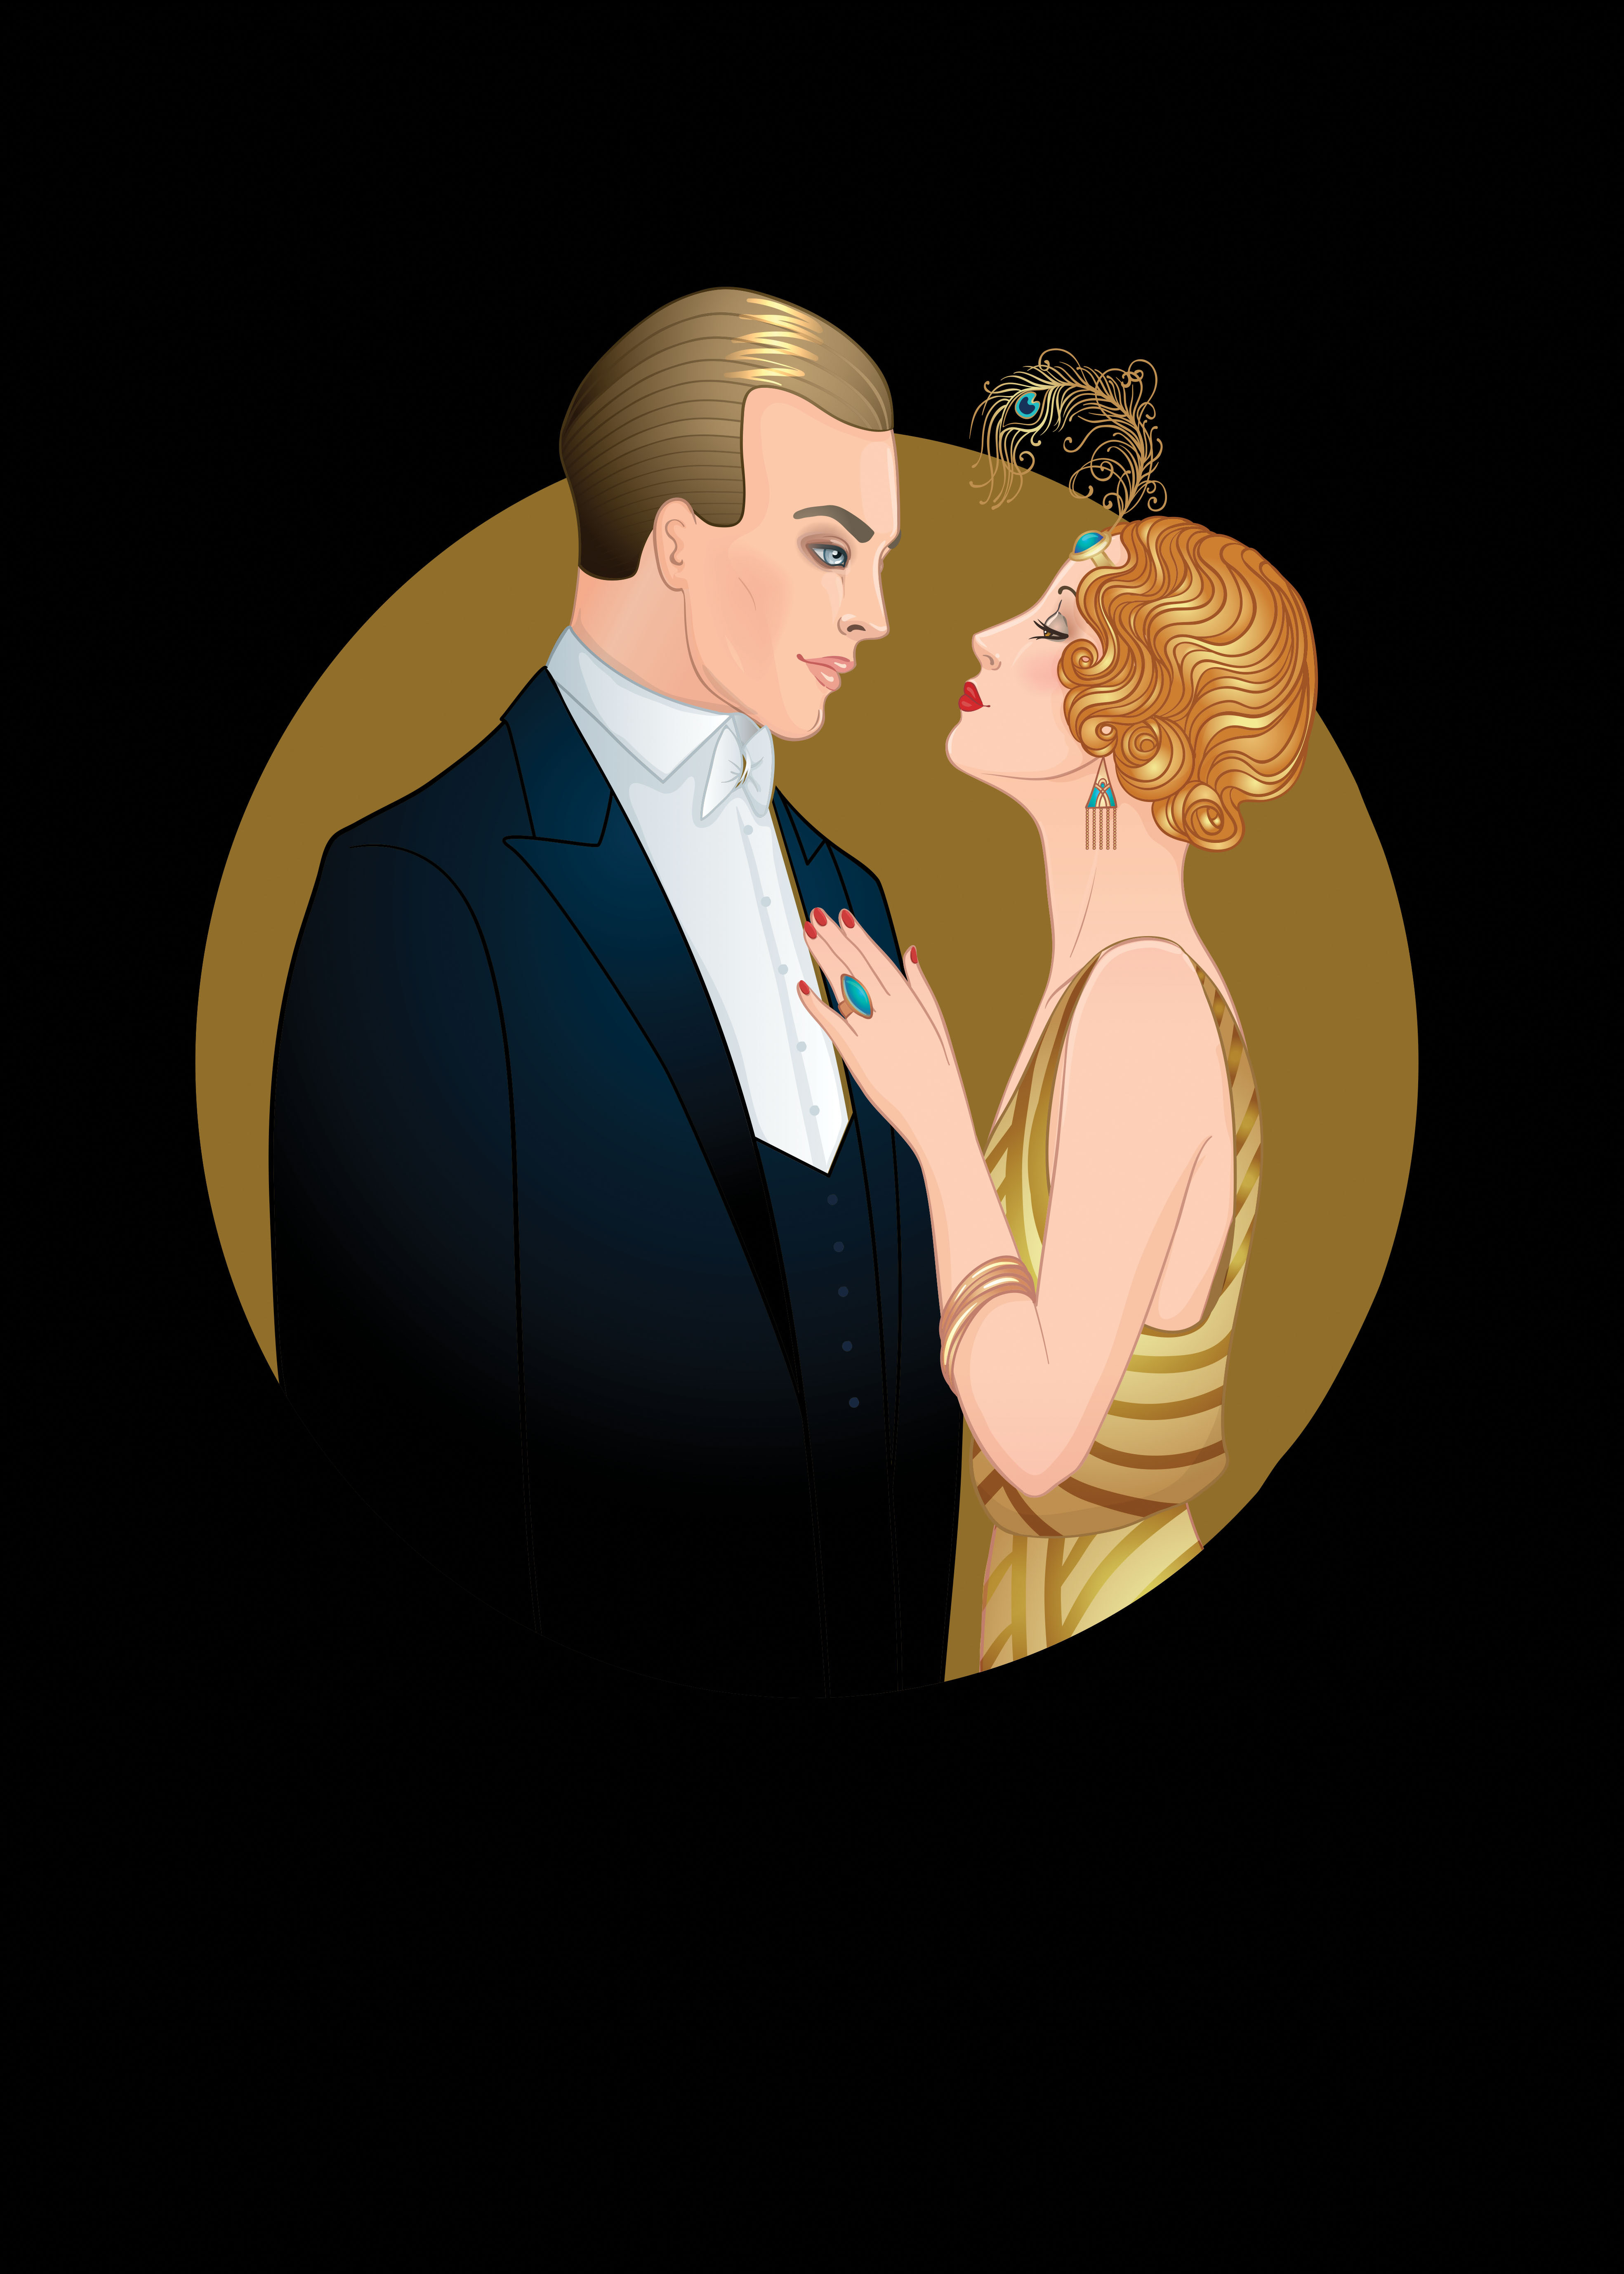 Illustration of a 1920s style couple, they gaze into each other's eyes